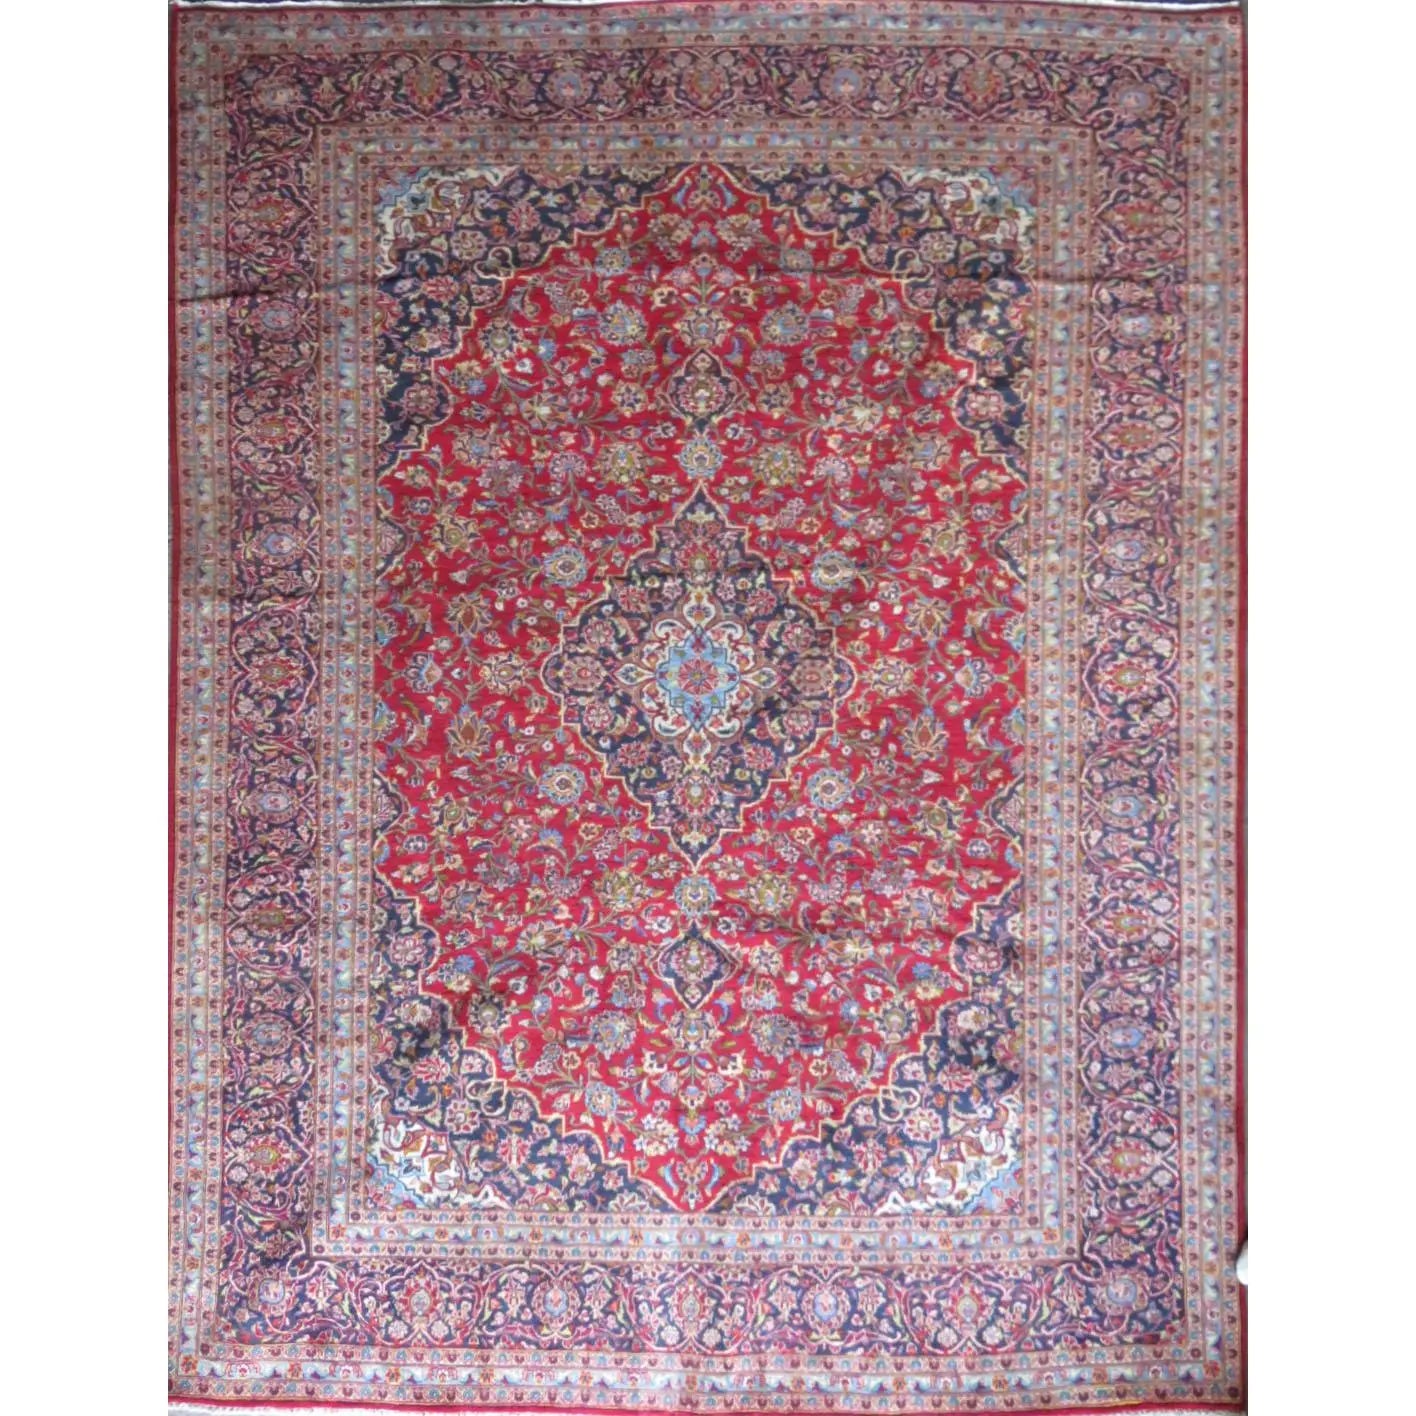 Hand-Knotted Persian Wool Rug _ Luxurious Vintage Design, 12'9" X 9'4", Artisan Crafted